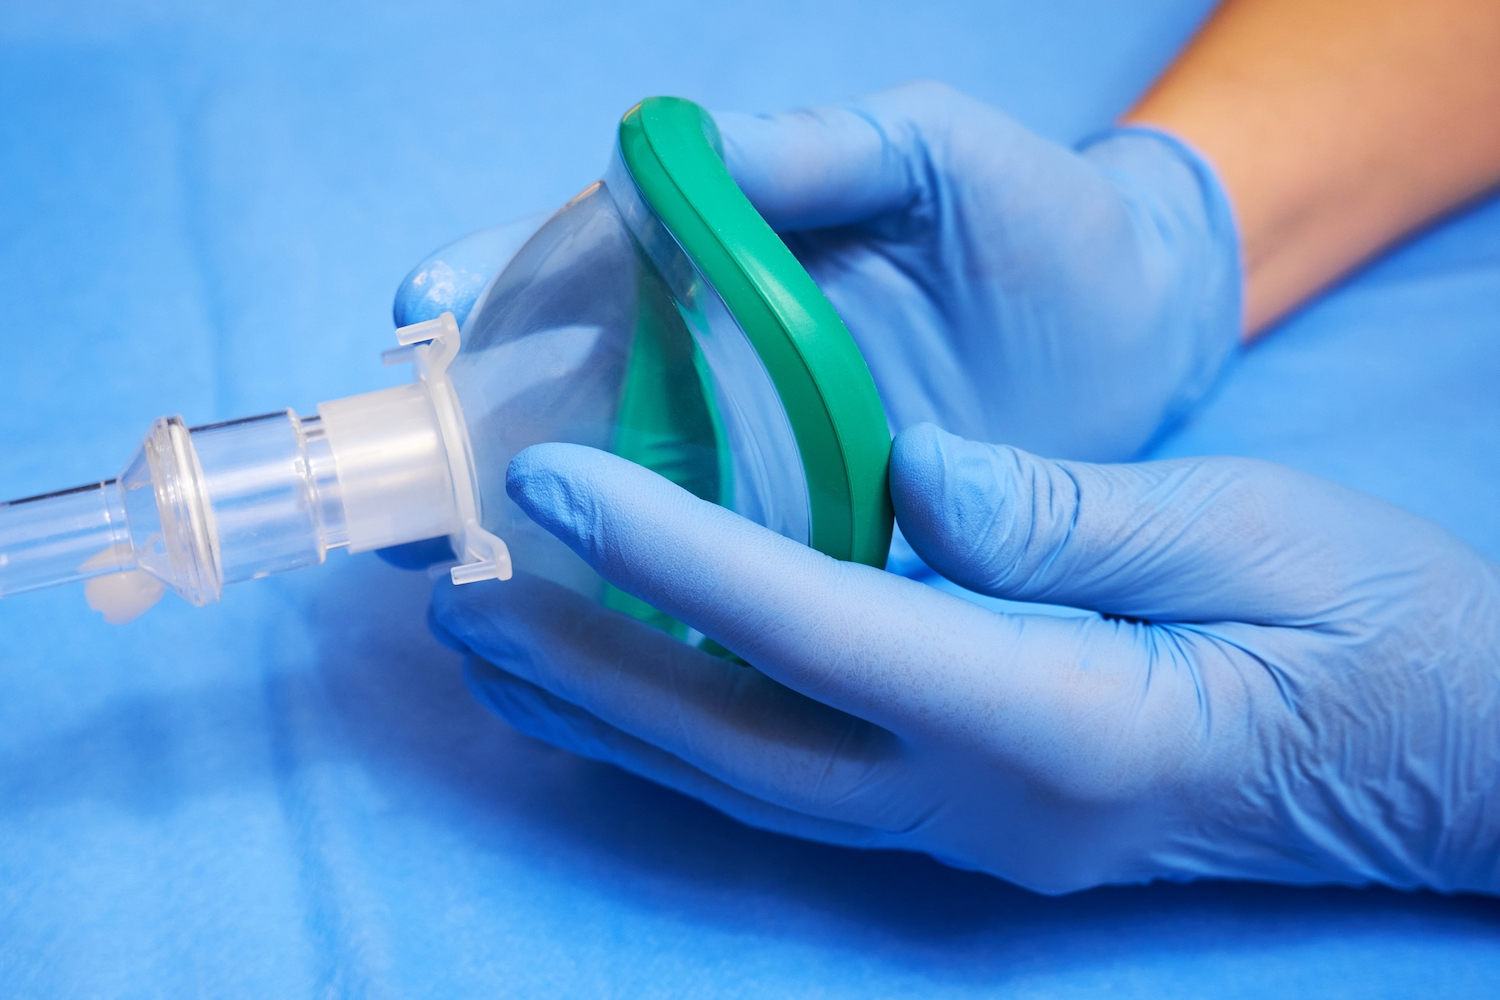 Hands of a medic in gloves holds an anesthesia mask